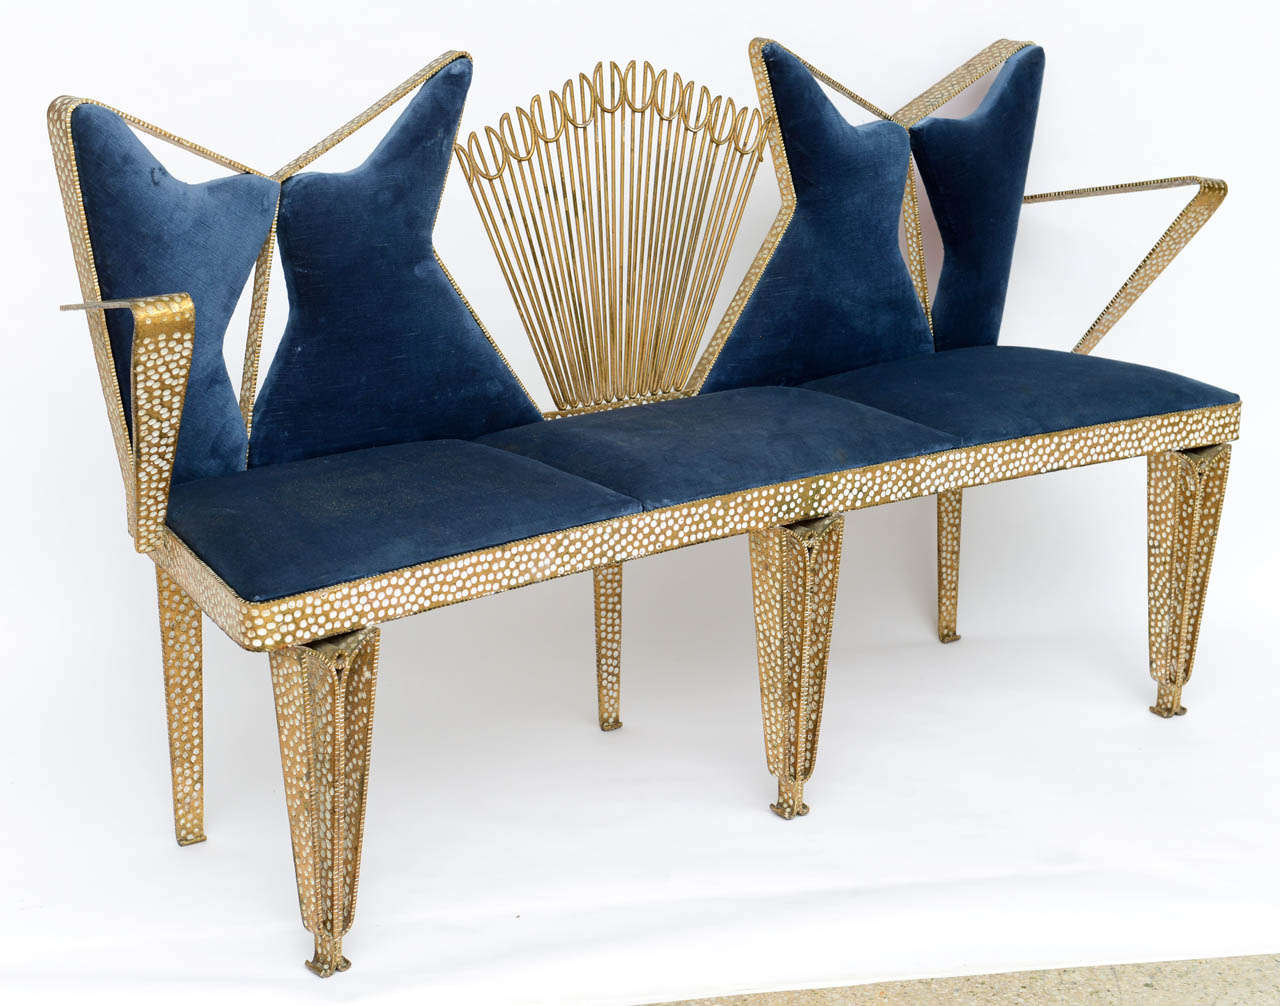 All done in fine hand-hammered gilt iron with upholstered areas.